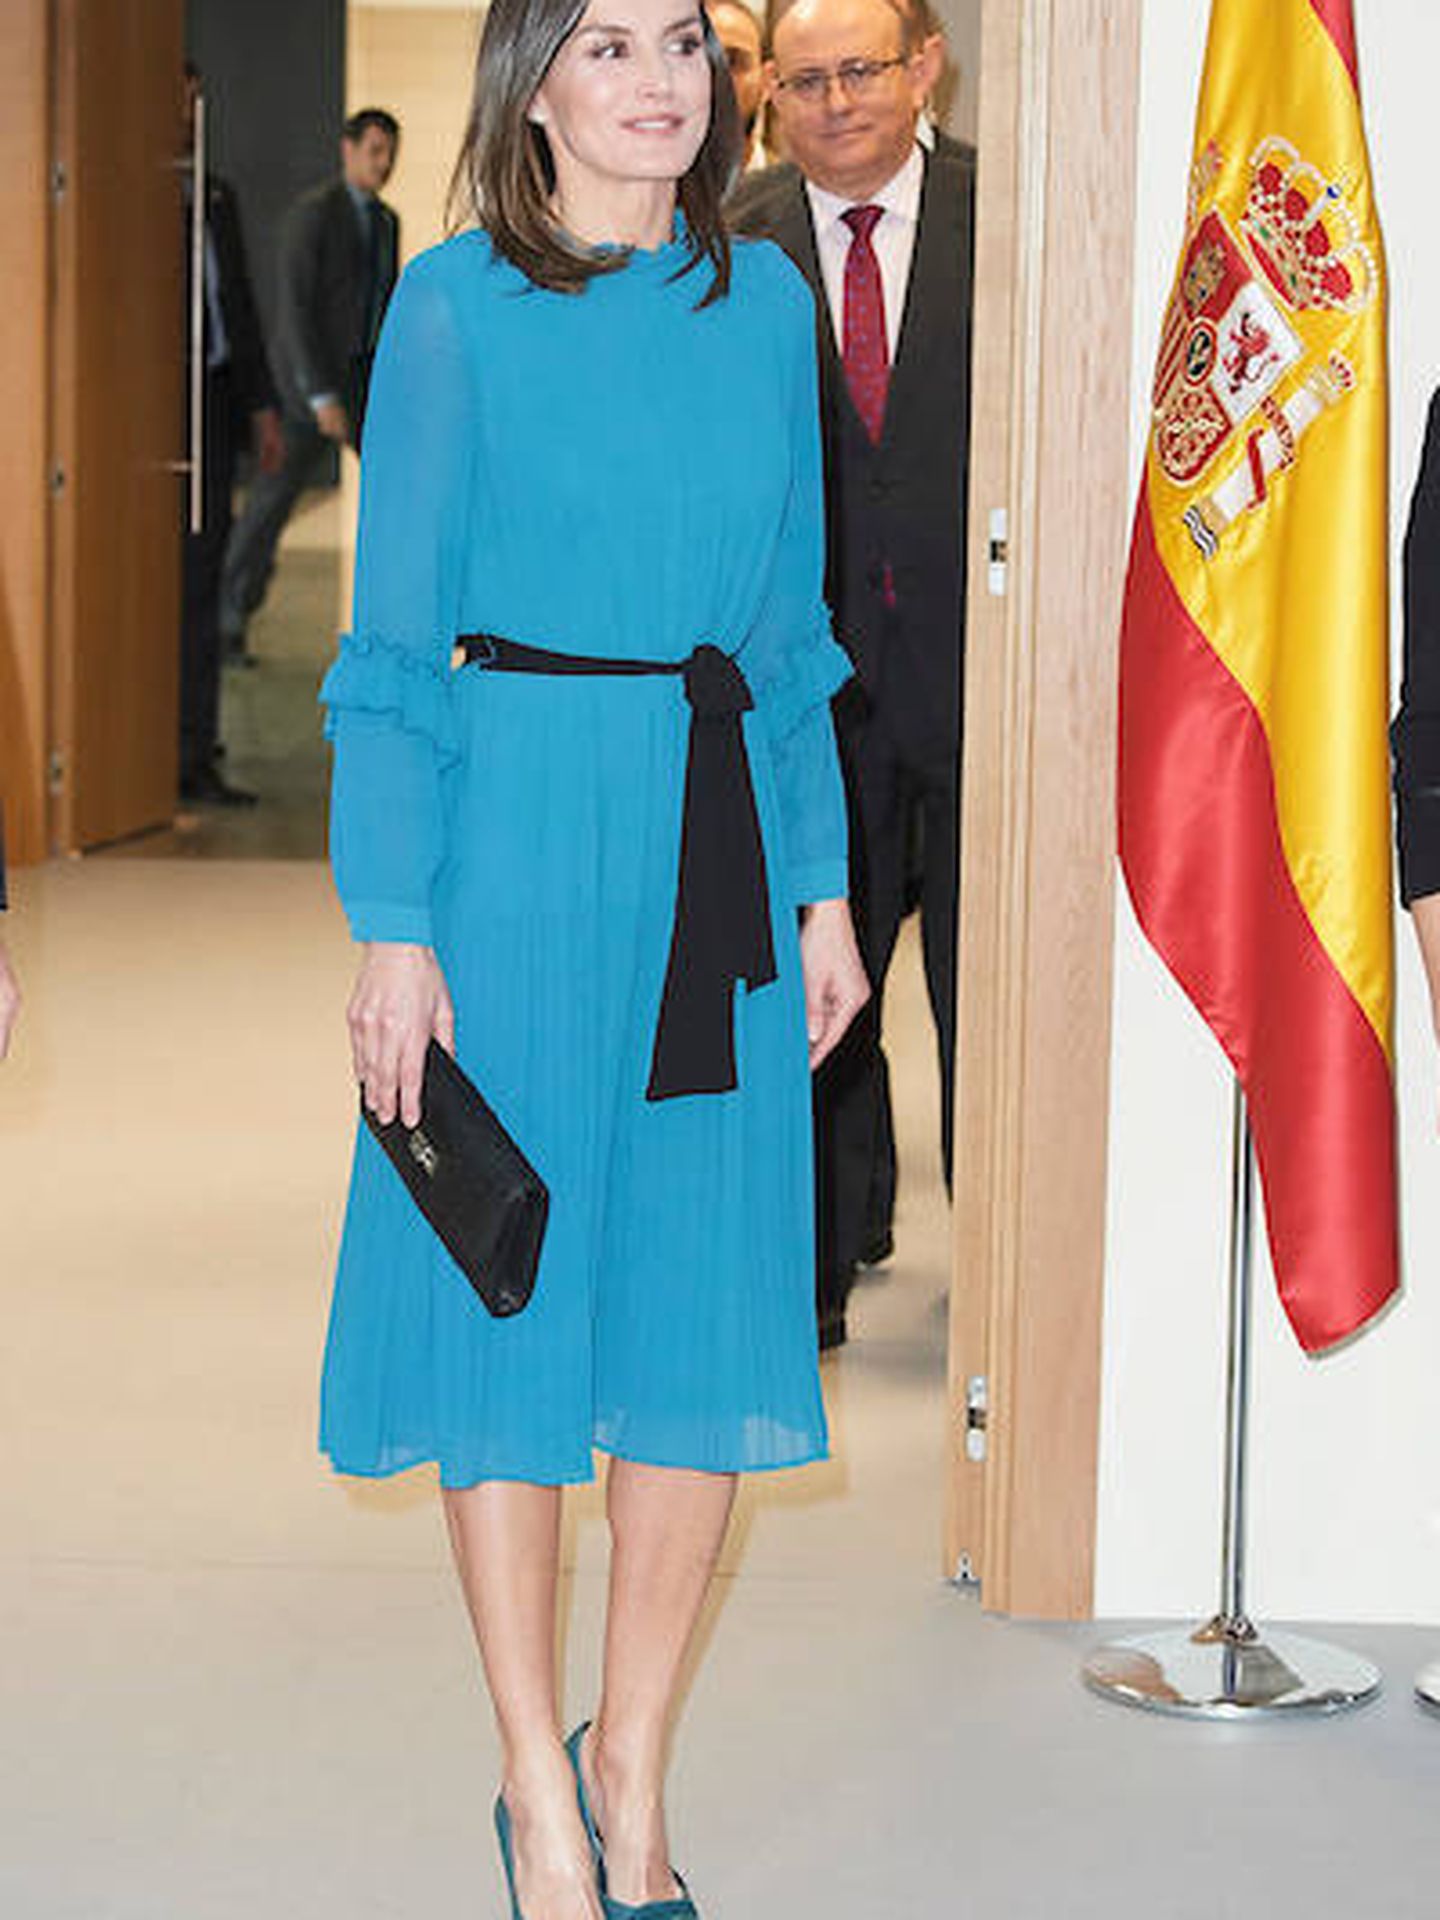  Doña Letizia. (Limited Pictures)